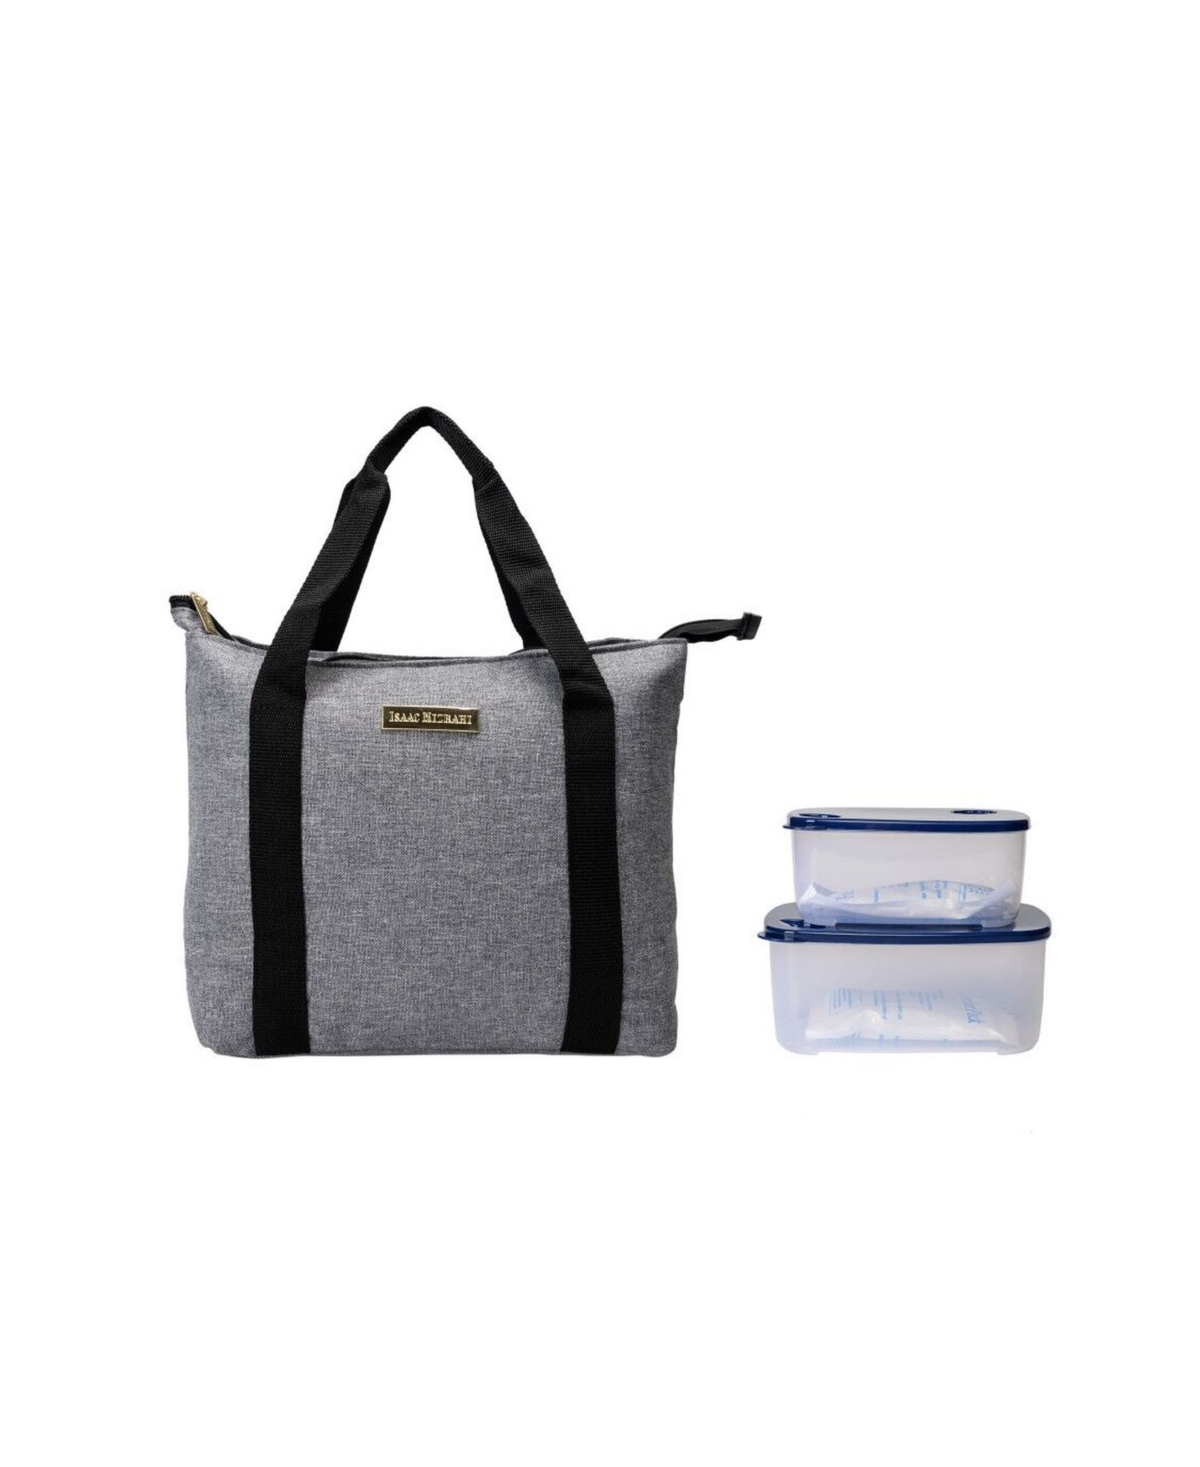 Vesey Large Lunch Tote Bag, Set of 3 - Suit Gray